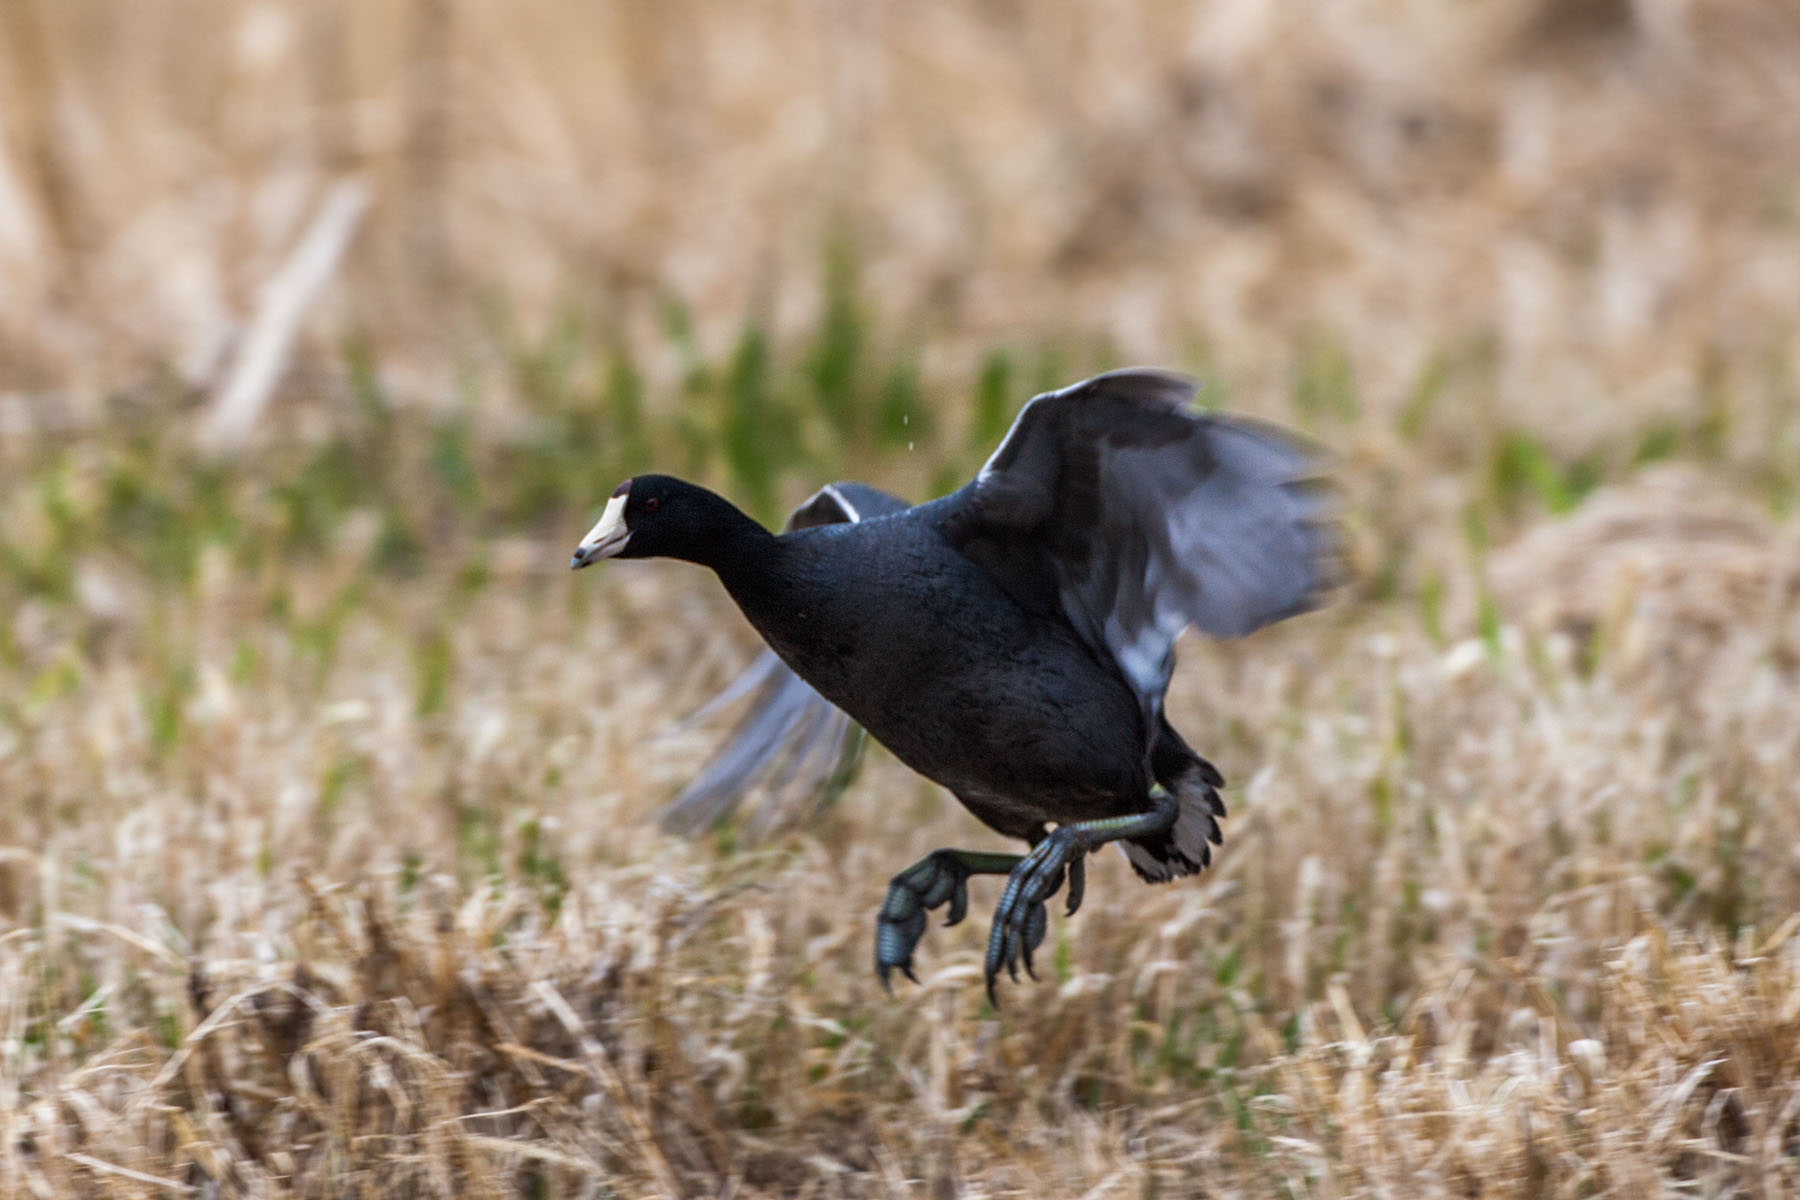 The coots were out of the water and foraging on the road, Squaw Creek NWR, Missouri.  Click for next photo.